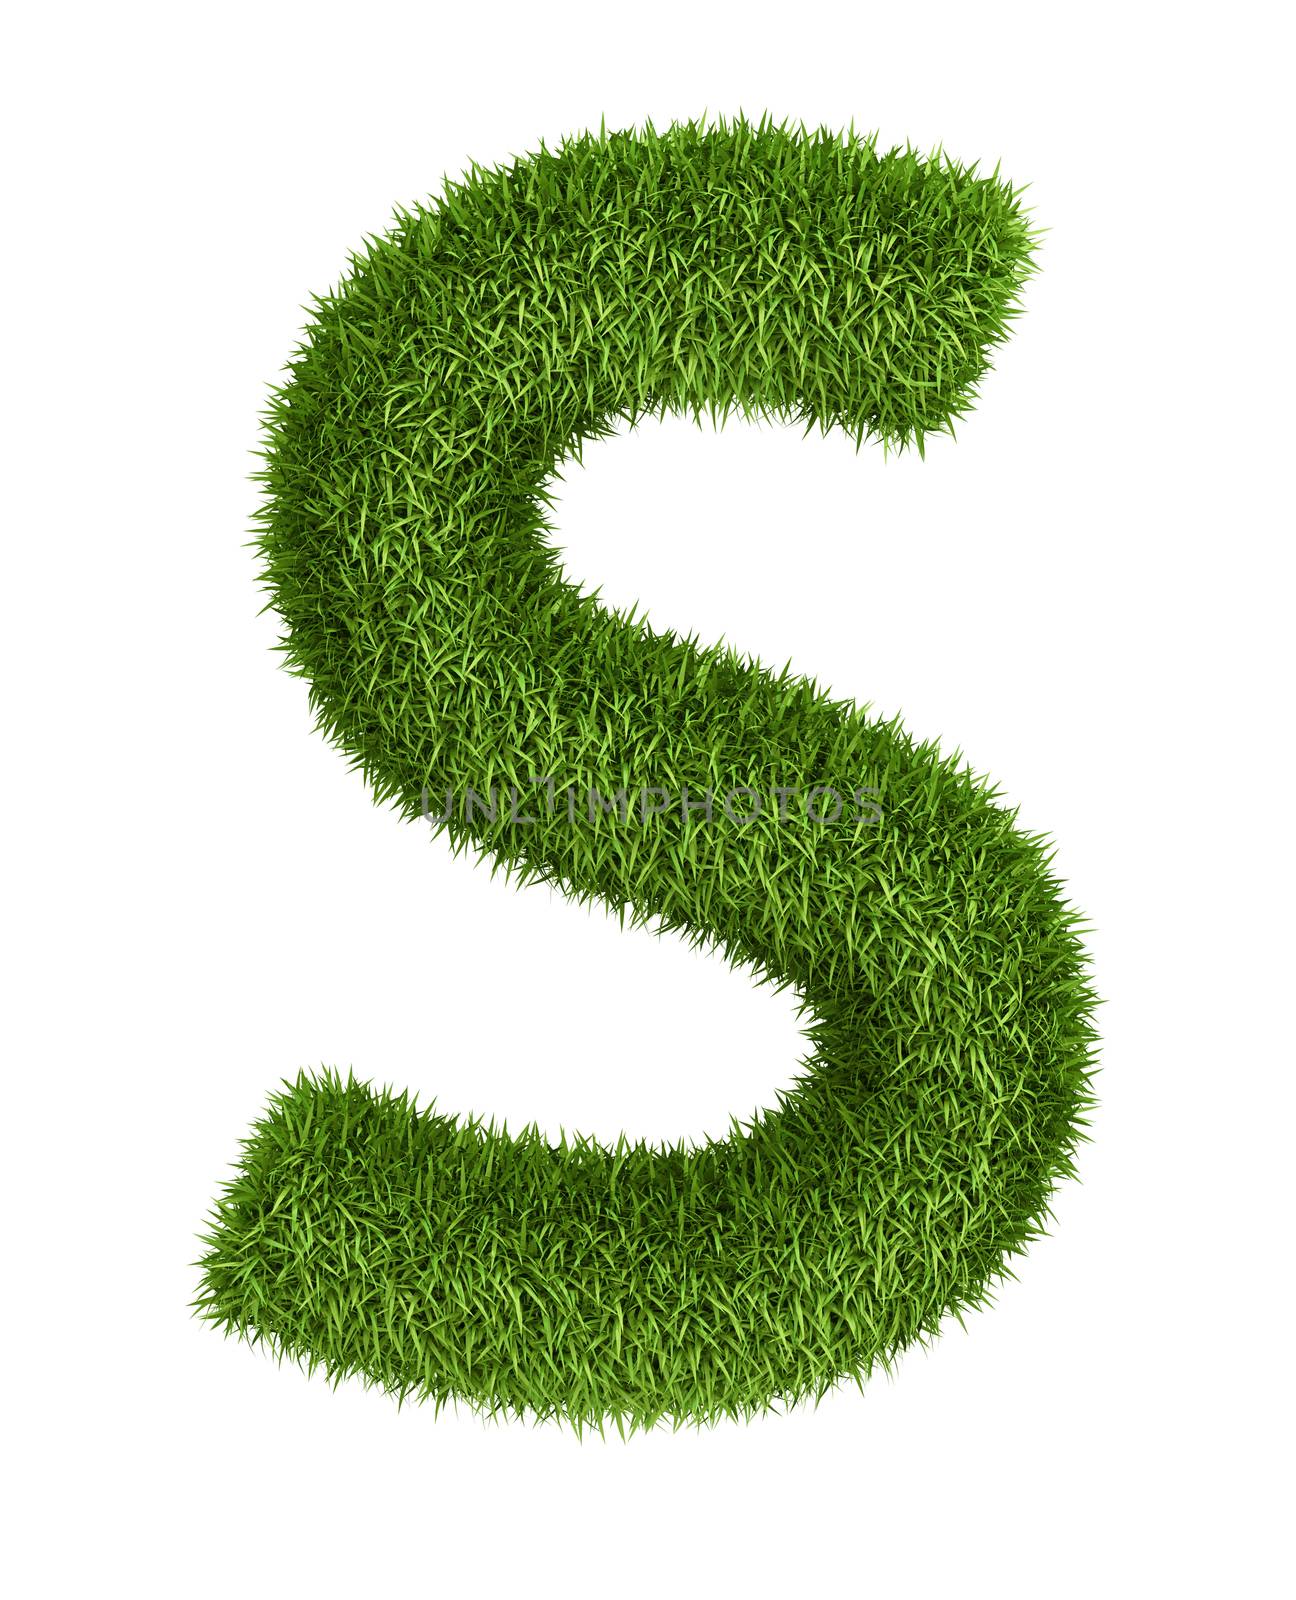 Natural grass letter S by iunewind